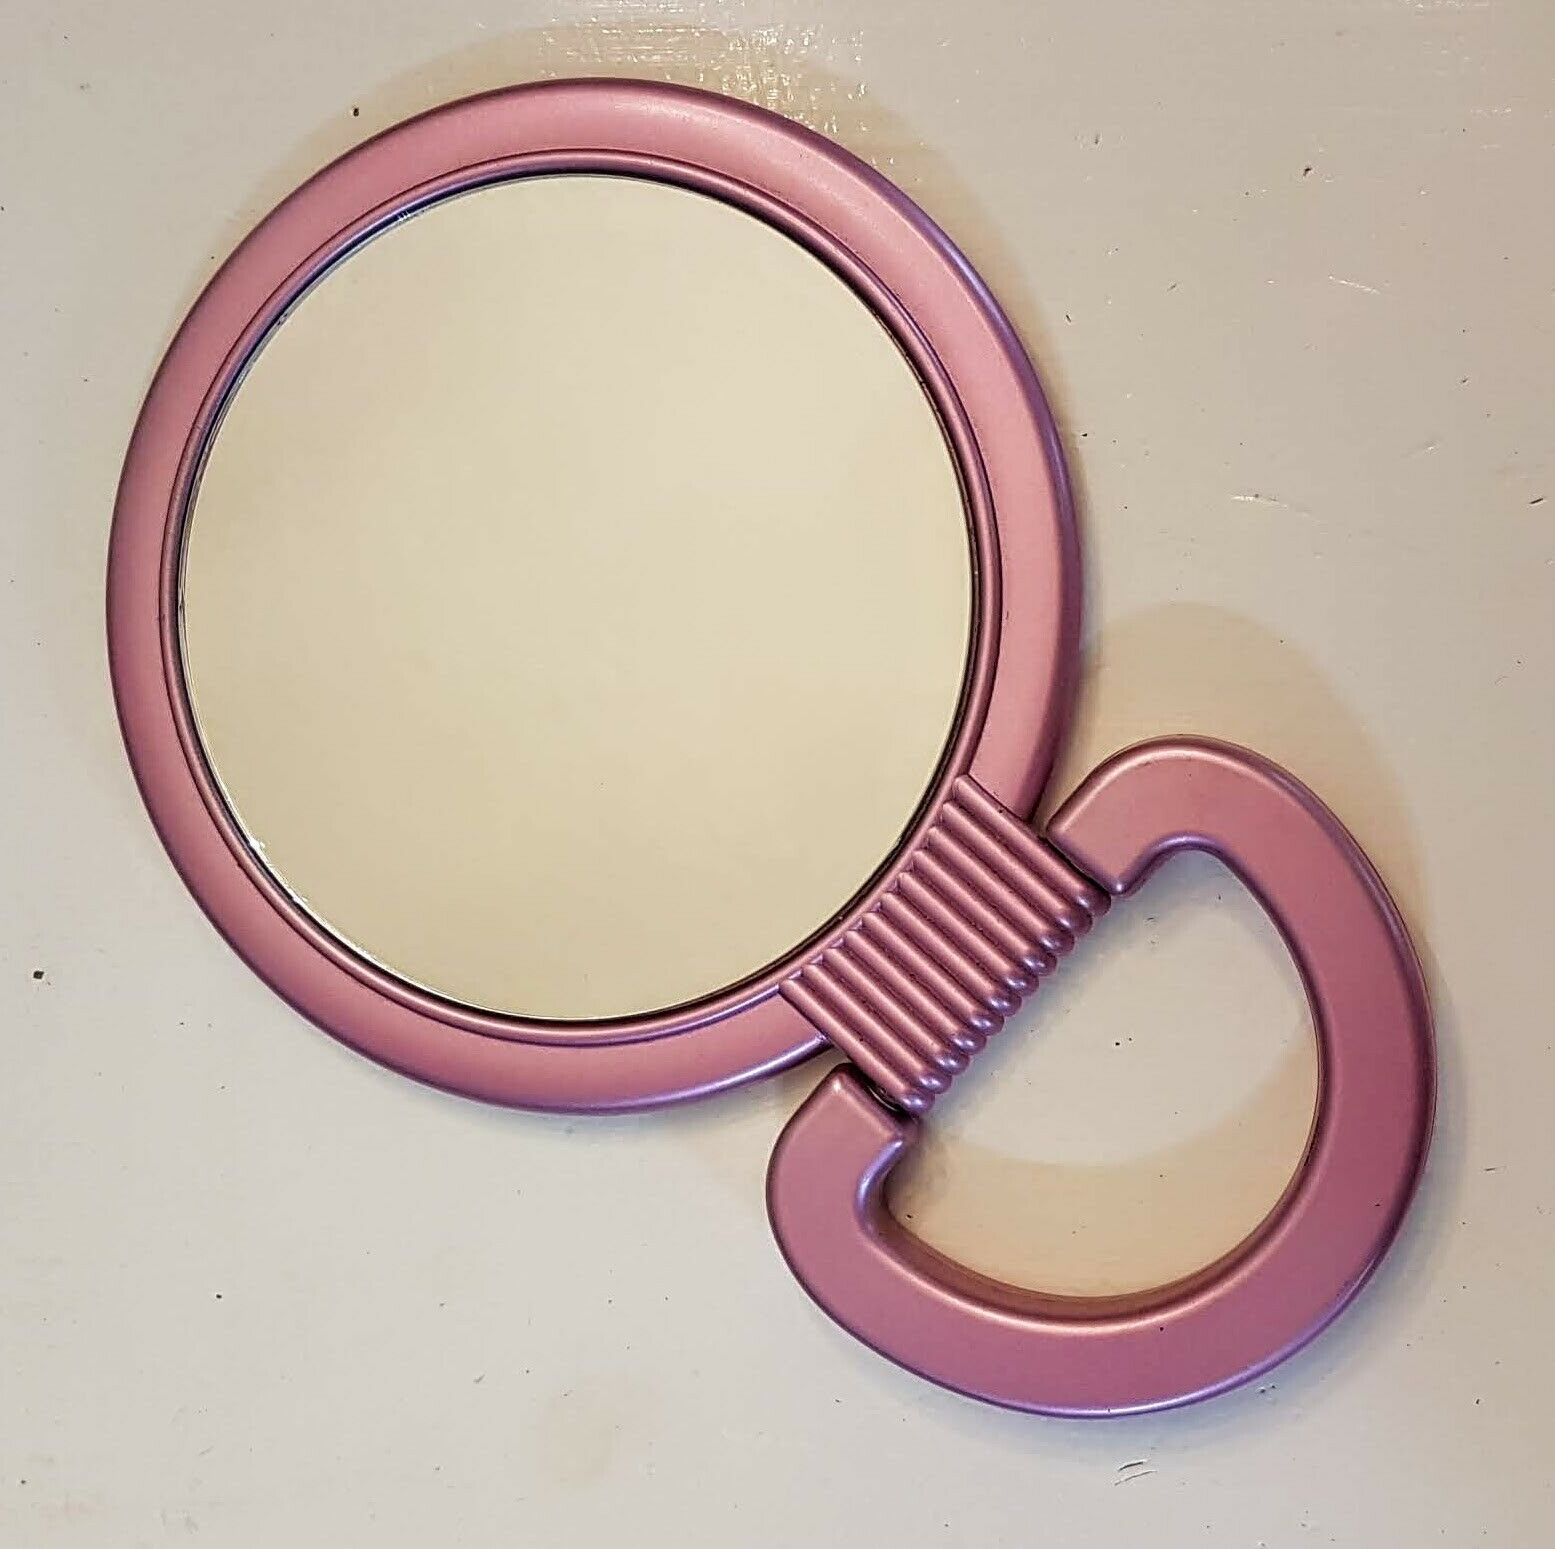 Conair Metallic Pink 5" Hand Mirror Two Sided Convertible Handle Hangs Stands Up